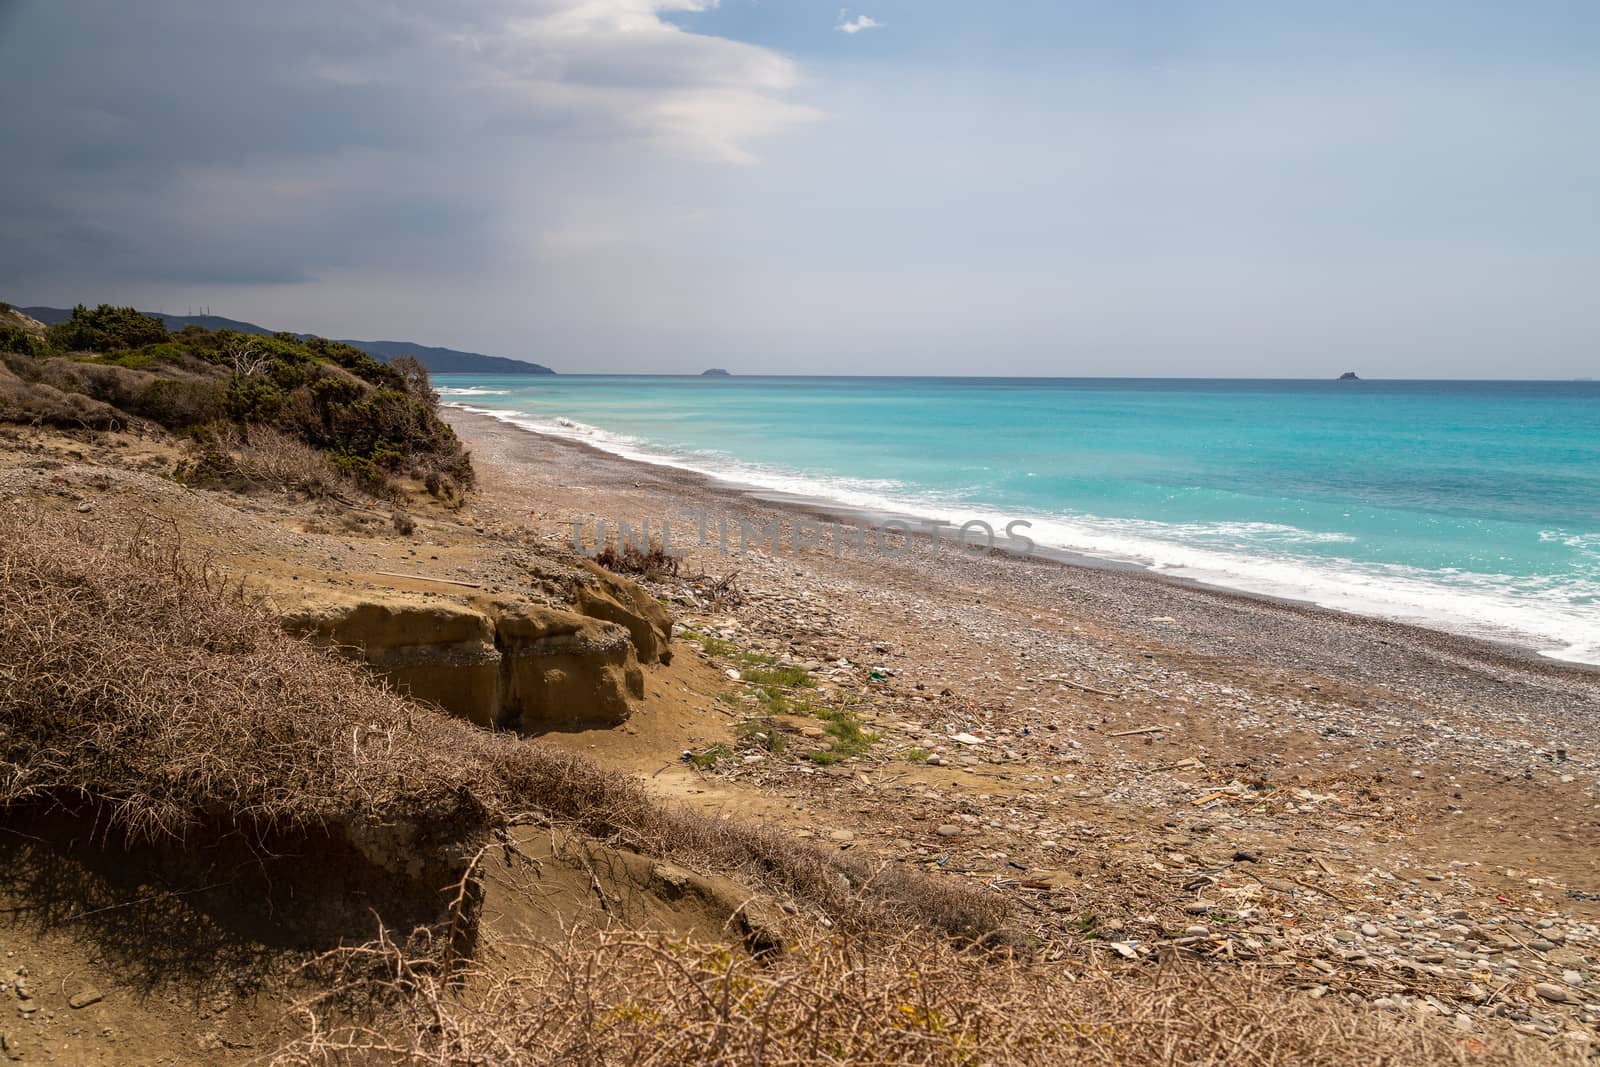 Gravel / pebble beach at the westcoast of Rhodes island near Kattavia with ocean waves and turquoise water